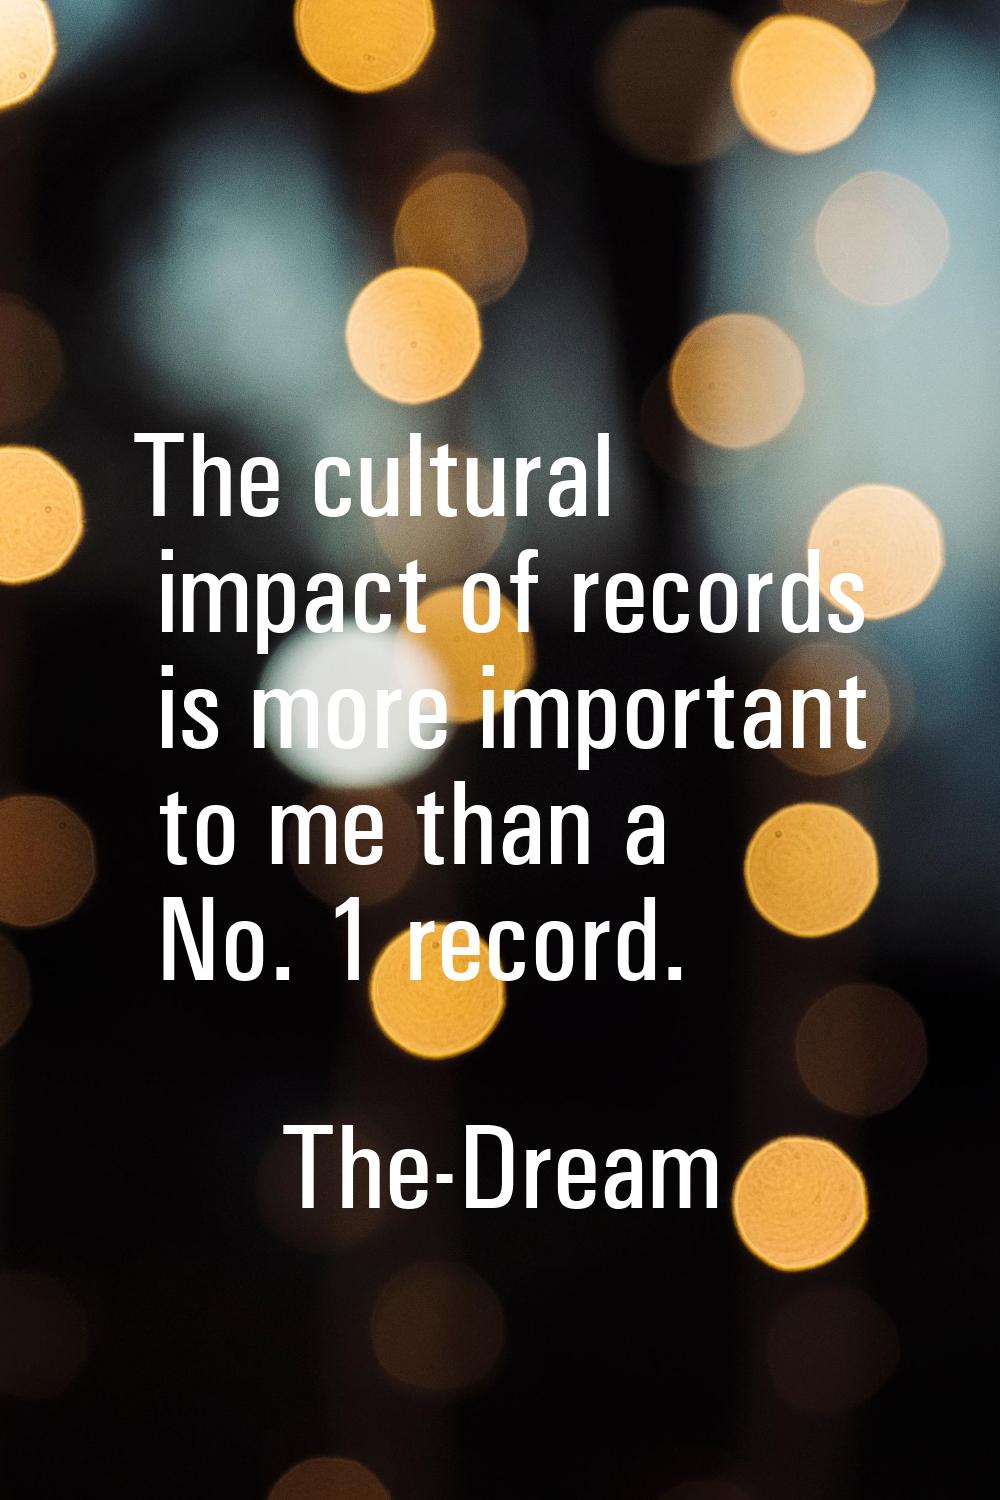 The cultural impact of records is more important to me than a No. 1 record.